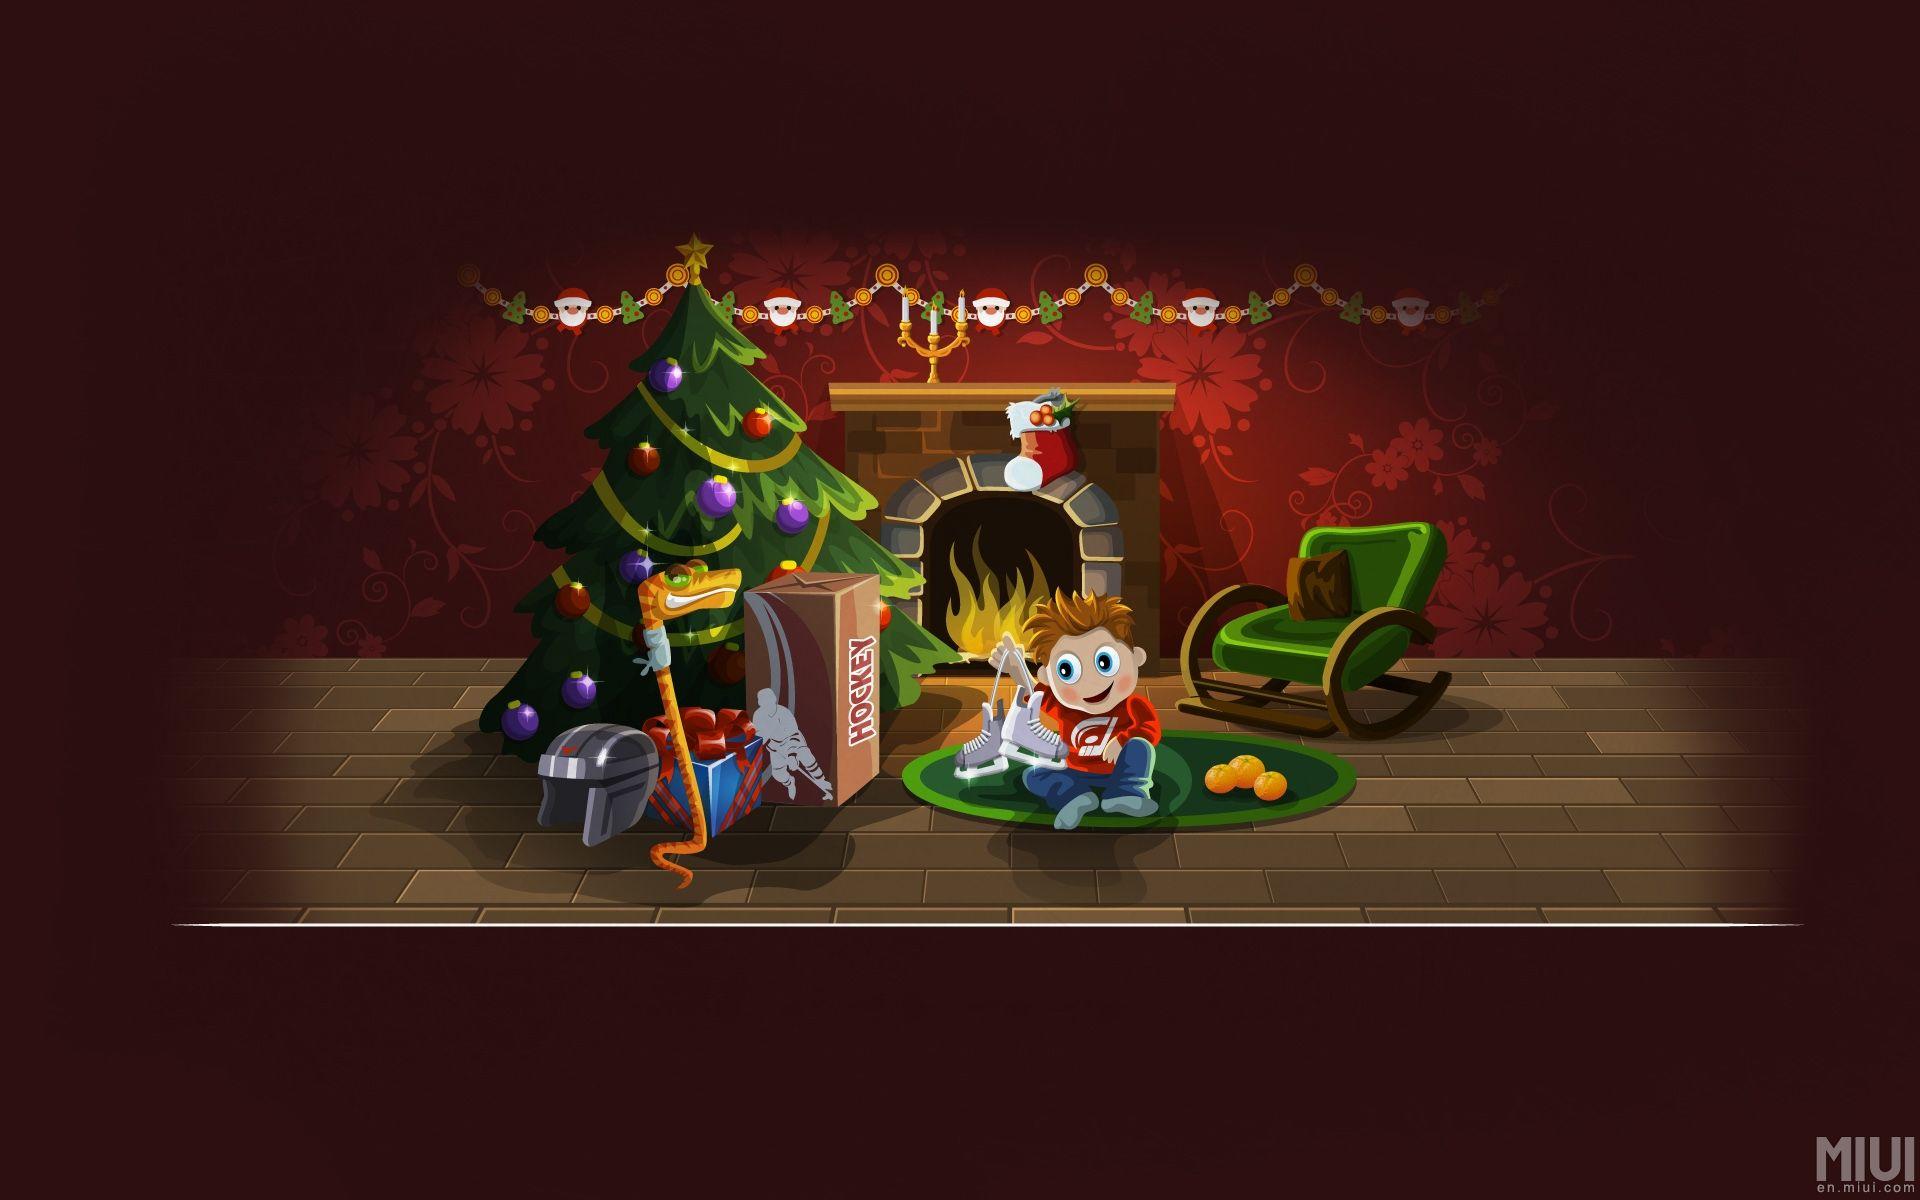 MIUI Resources Team Jolly Christmas Wallpaper